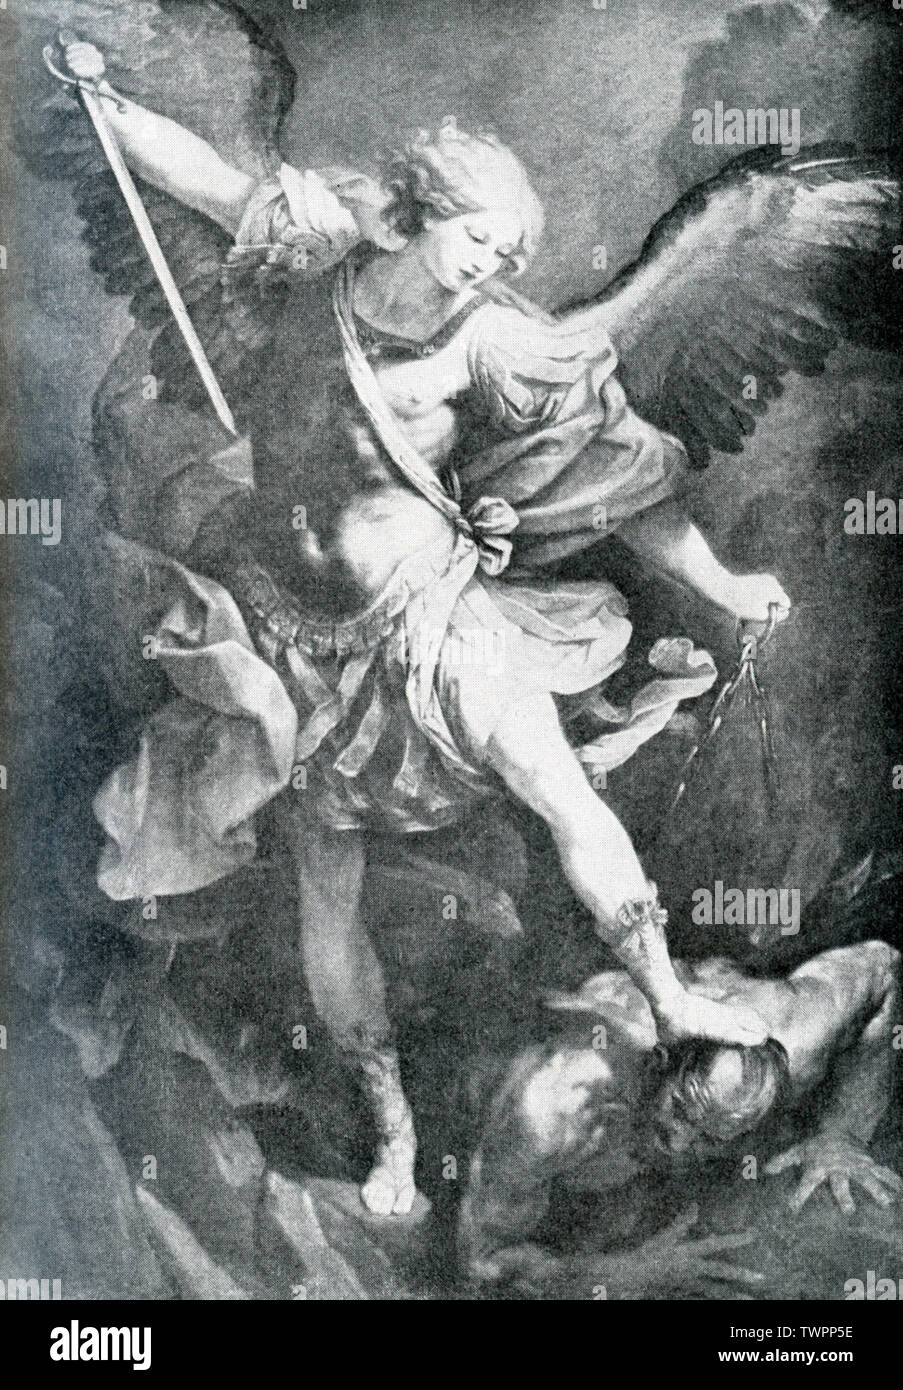 This painting is titled “St Michael Archangel” and shows the Christian saint Michael trampling a dragon. It was painted by the italian artist Guido Reni in 1636, at the request of Pope Urban VIII for the Church of Santa Maria della Concezione del Cappuccini in Rome. Stock Photo